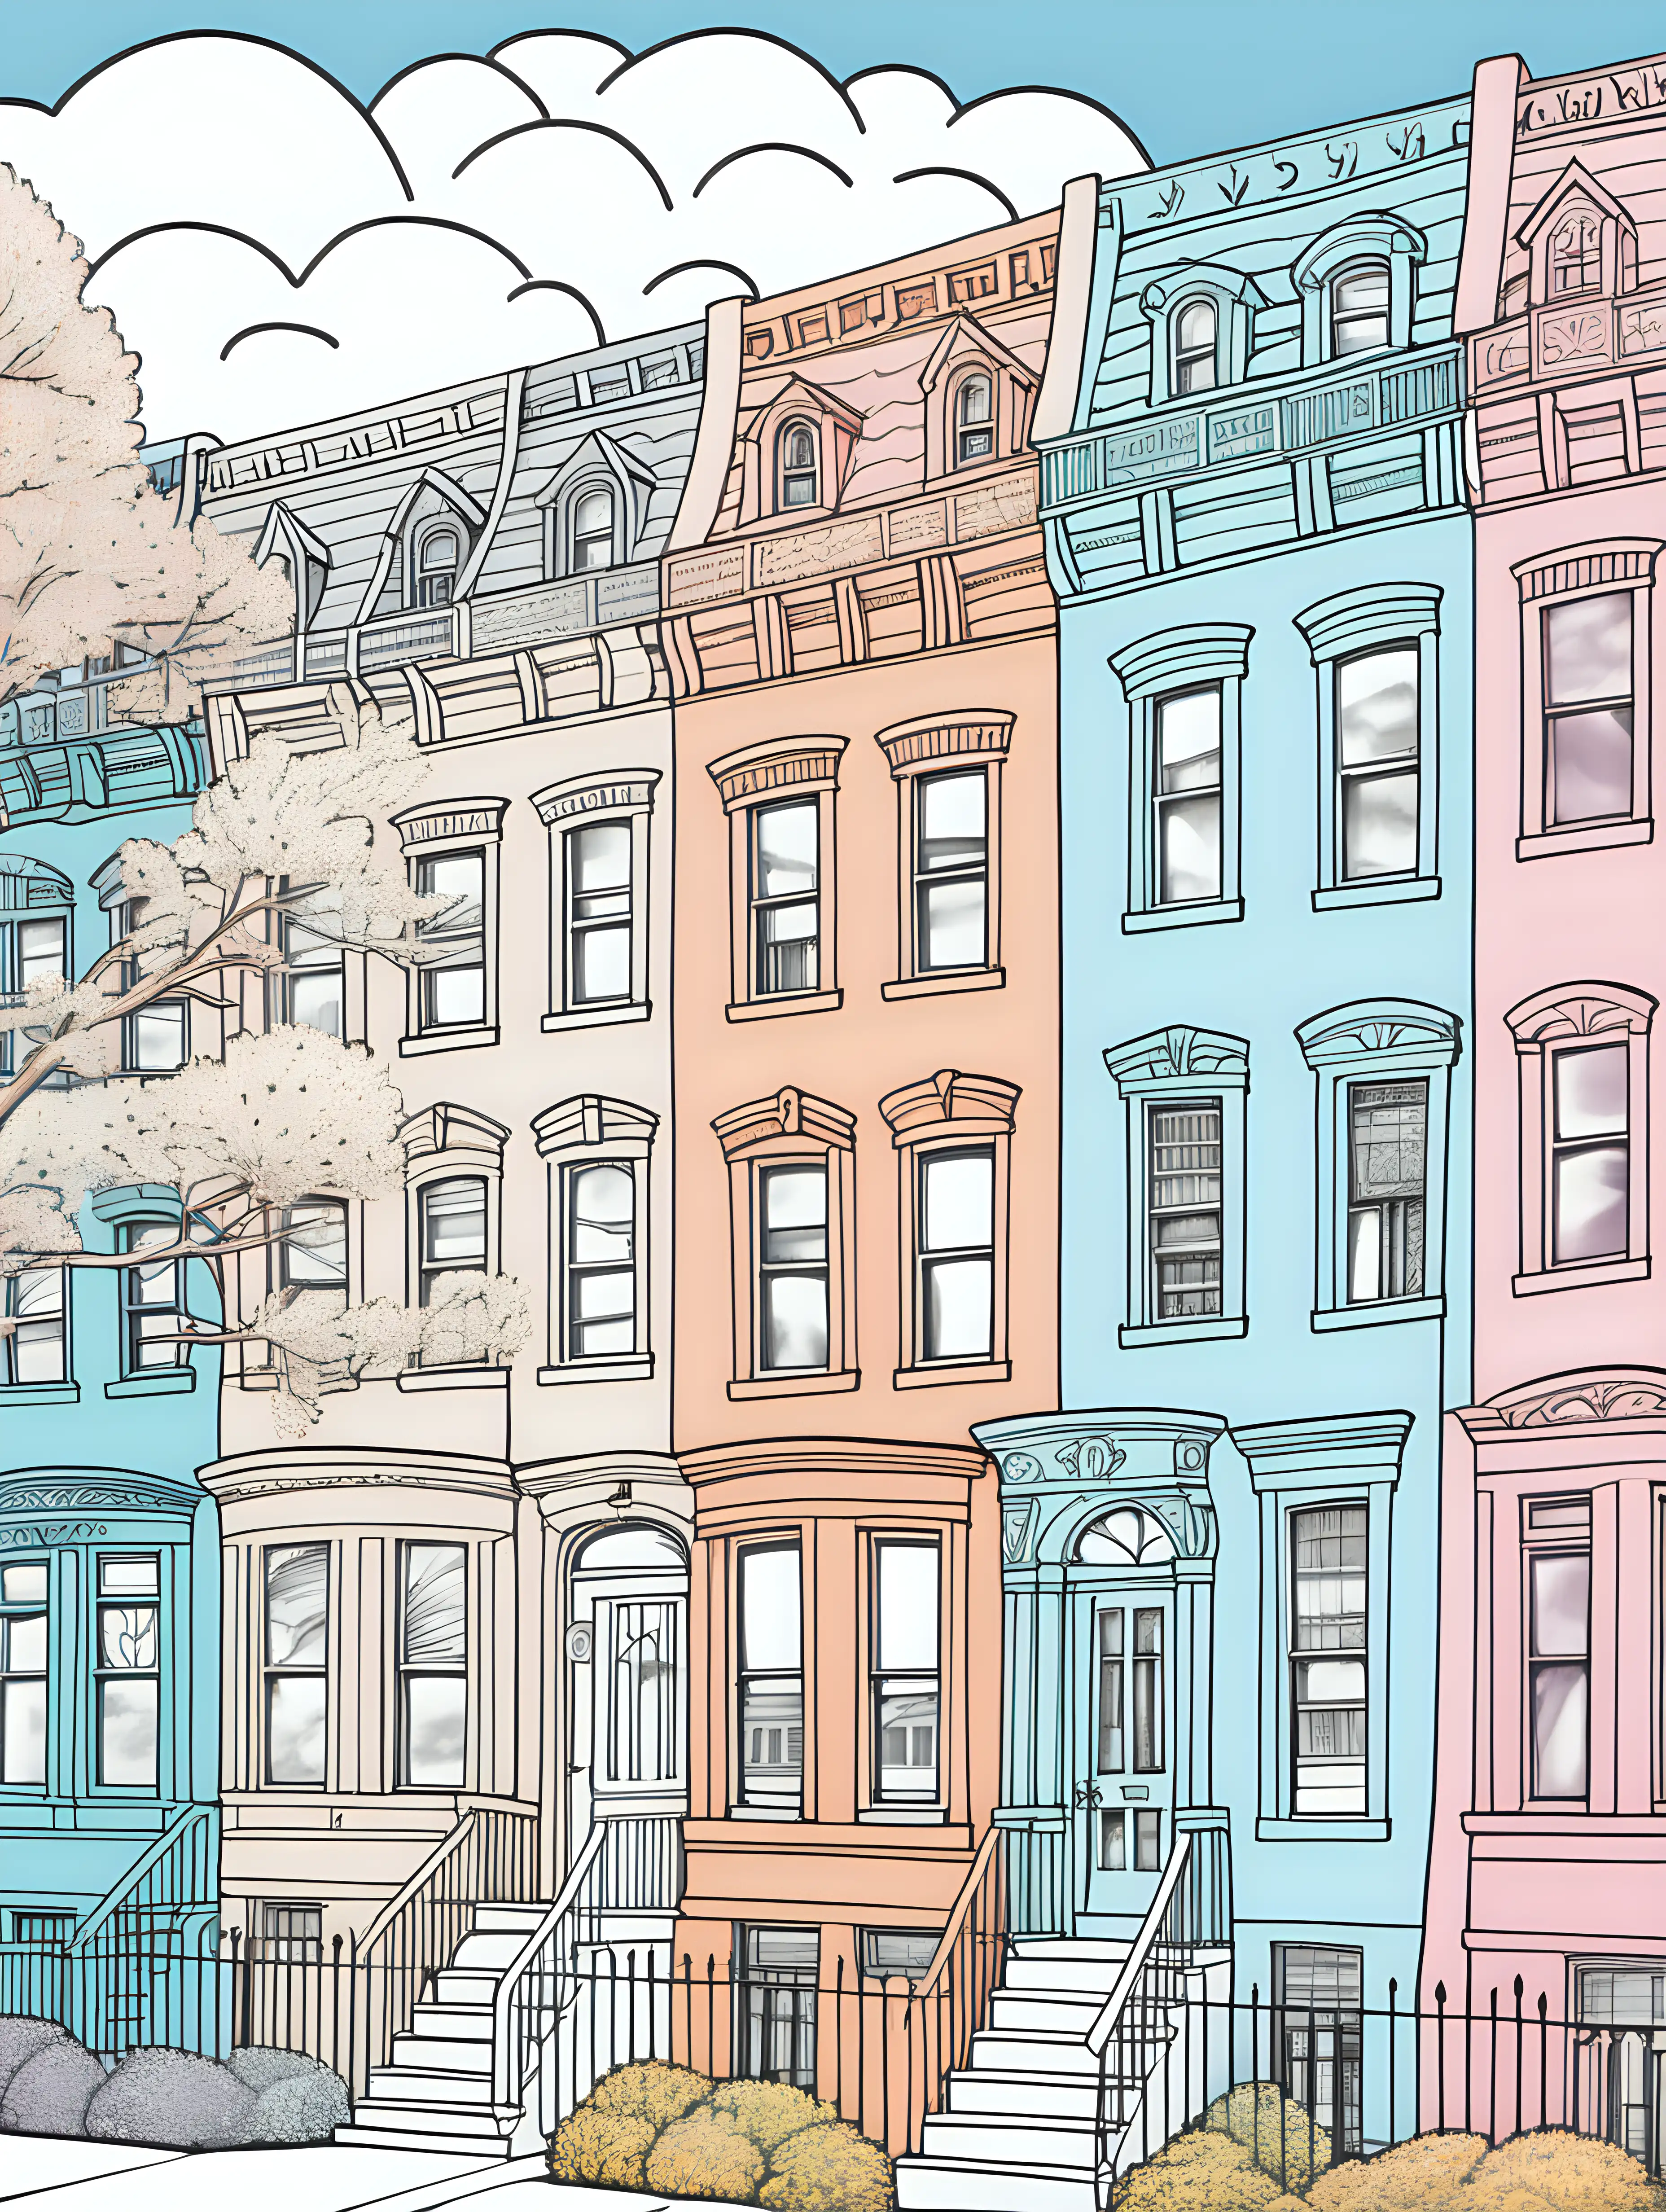 illustrated cover for a coloring book, colored in pastel palettes, new york city style townhouses aligned horizontally, each a different color palette, pretty trees and flowers line the block, Some houses are colored in perfectly while others are half colored in, inviting readers to fill in the blanks with their imagination, Above is a playful sky with a sun and some clouds, image serves as the perfect wrap for a whimsical coloring book for young adults, sharp details.